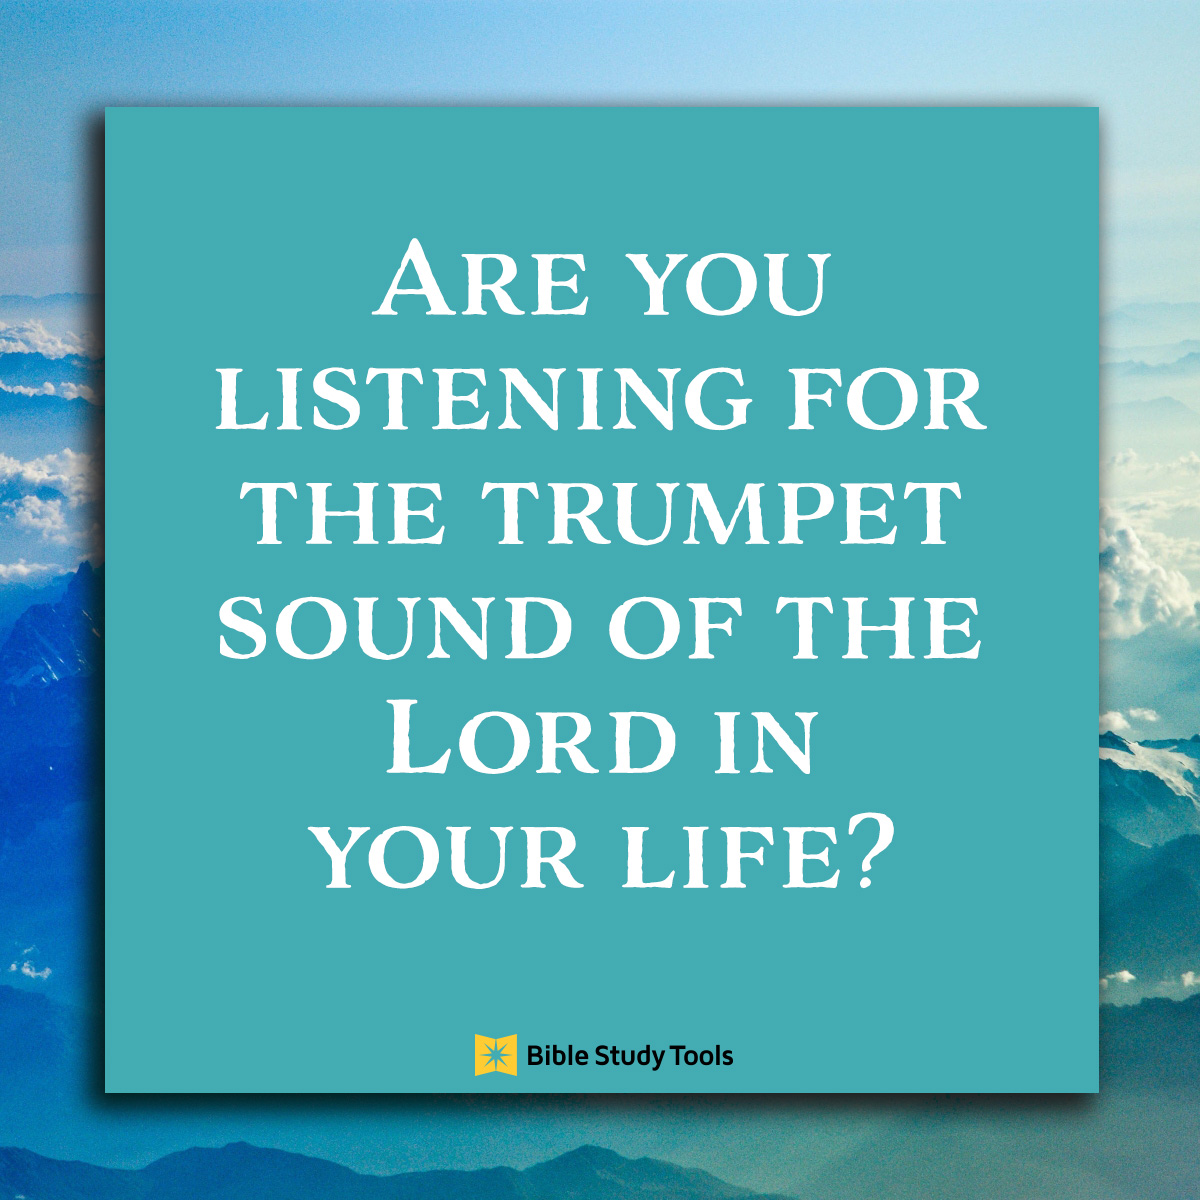 Trumpet sound of the Lord, inspirational image